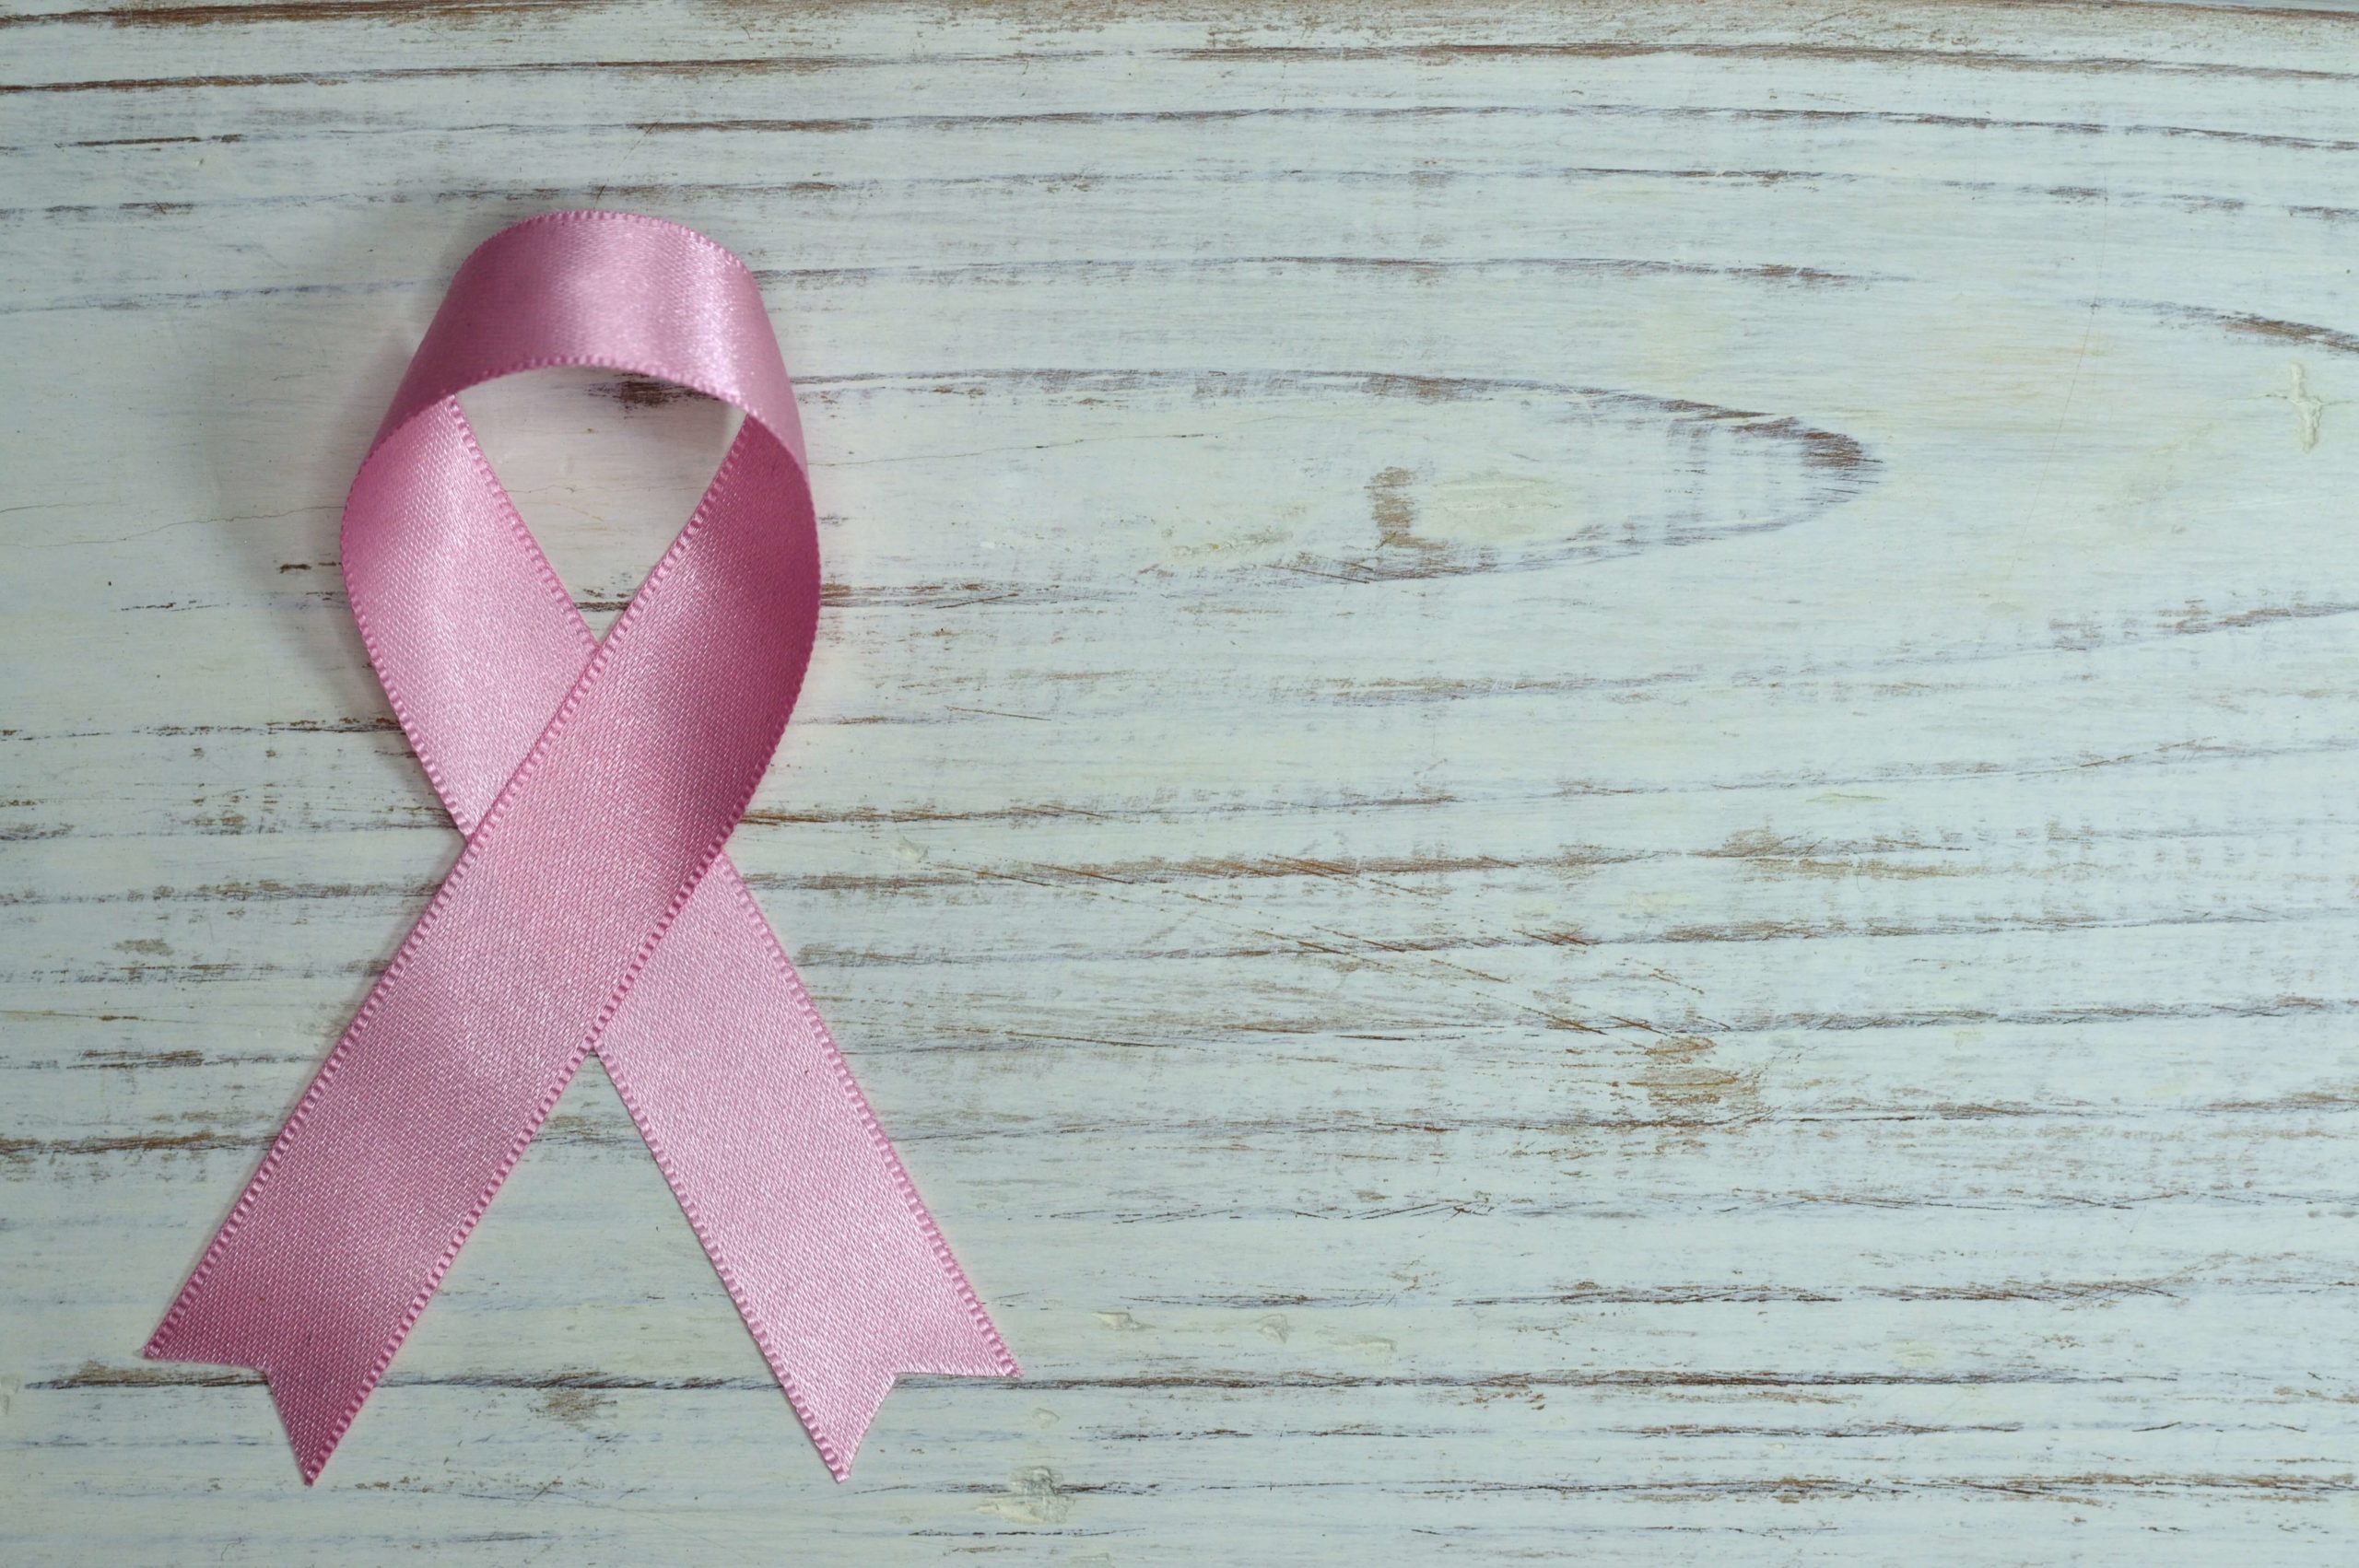 Call For An Early Detection: Breast Cancer